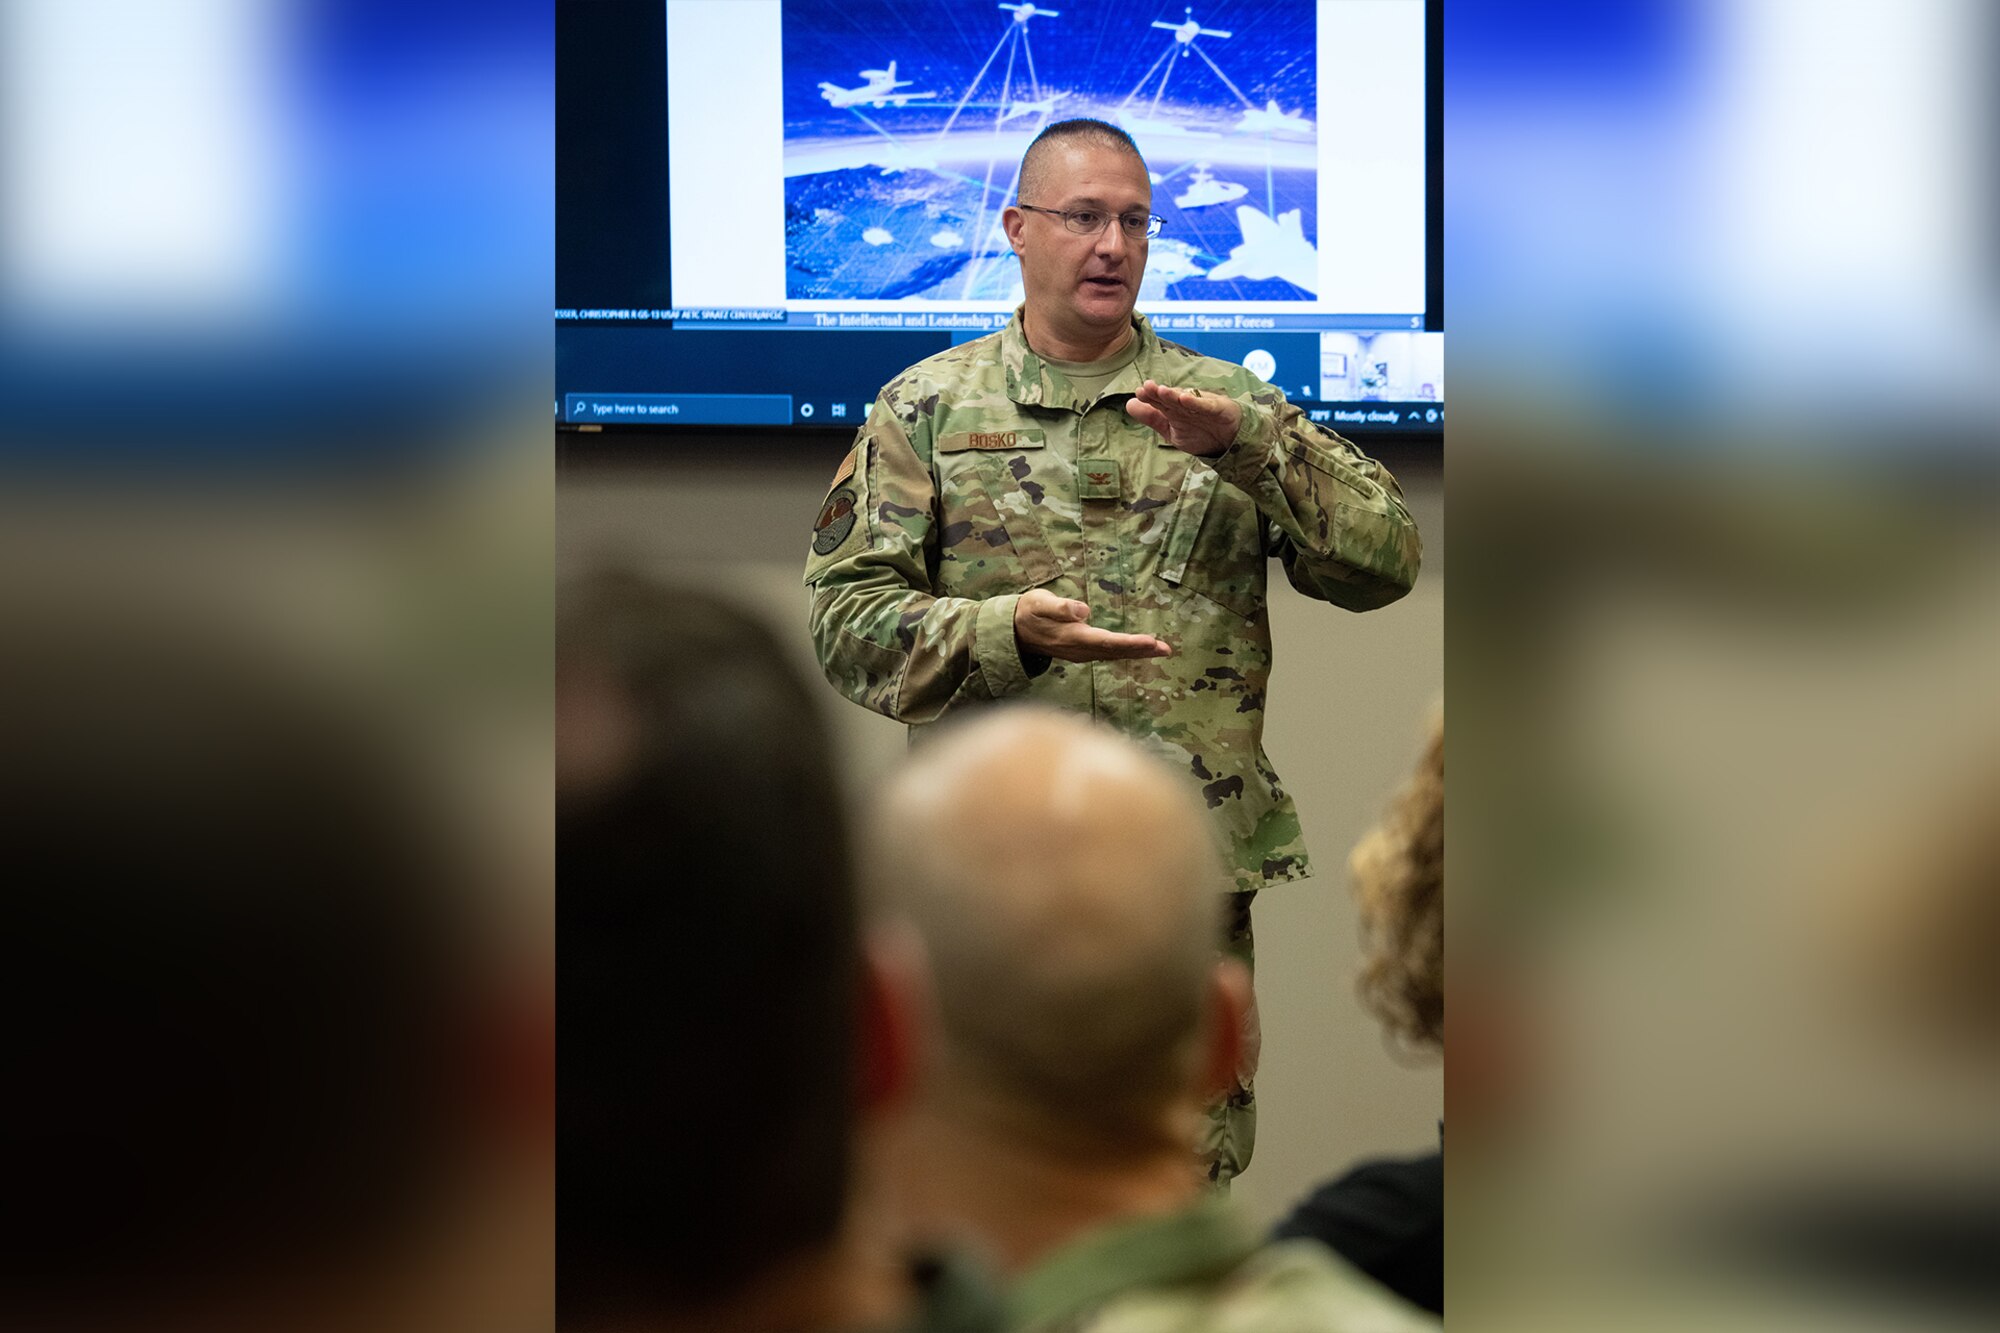 Col. David Bosko, commandant, Air Force Cyber College, leads a discussion with Air Force and Space Force Language Enabled Airmen Program scholars attending the Cyber Language Intensive Training Event course, July 22, 2021, Maxwell Air Force Base, Ala. Cyber LITE is a strategic competition course co-sponsored by the Air Force Culture and Language Center and Air Force Cyber College for advanced language proficiency LEAP scholars who have career-related ties to cyber operations or an academic background in cyber studies. (U.S. Air Force photo by Melanie Rodgers Cox)